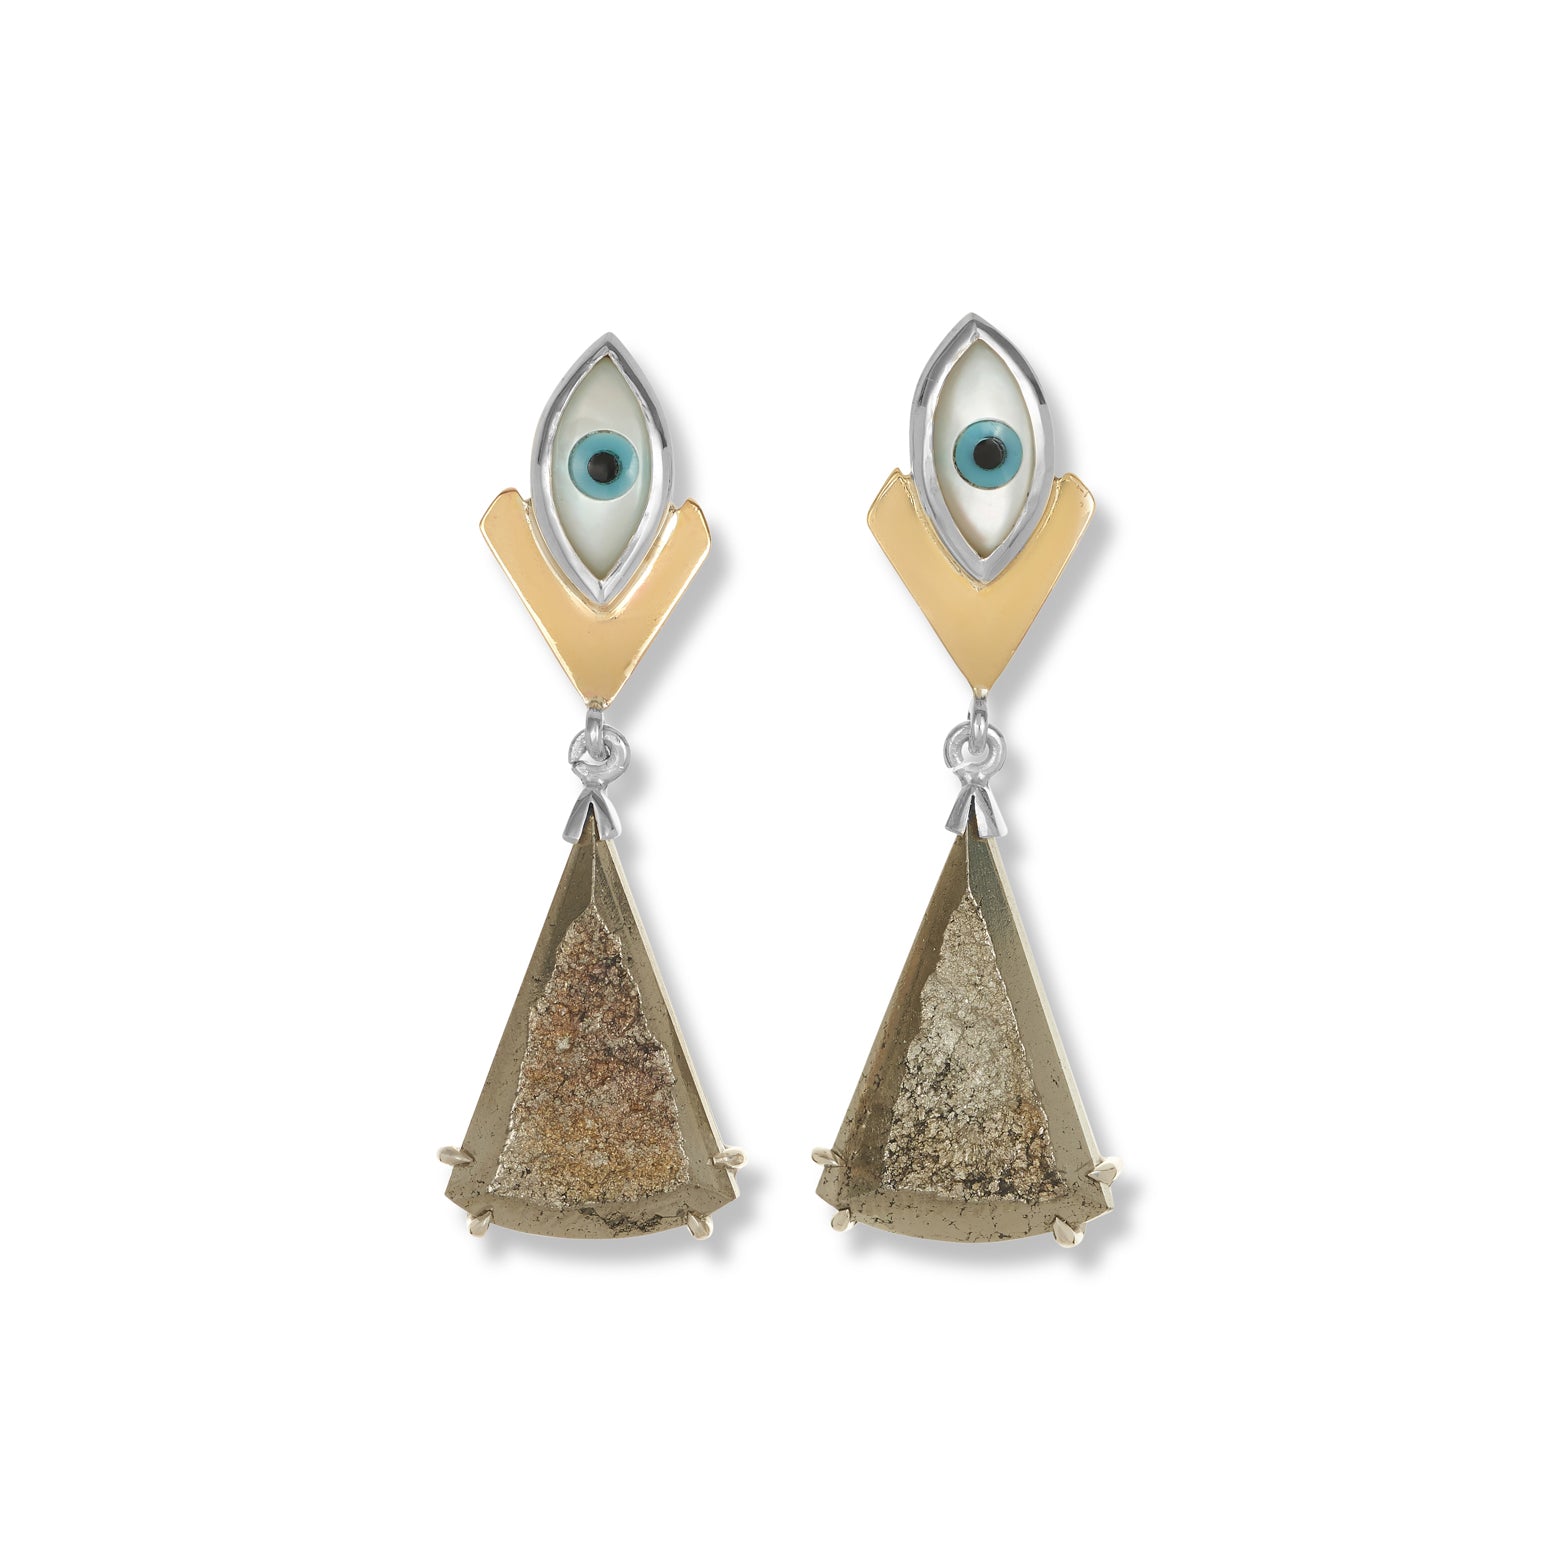 Kelly Woodcroft angel fish earrings feature an eye shaped stud connecting to a gold geometric dangle.